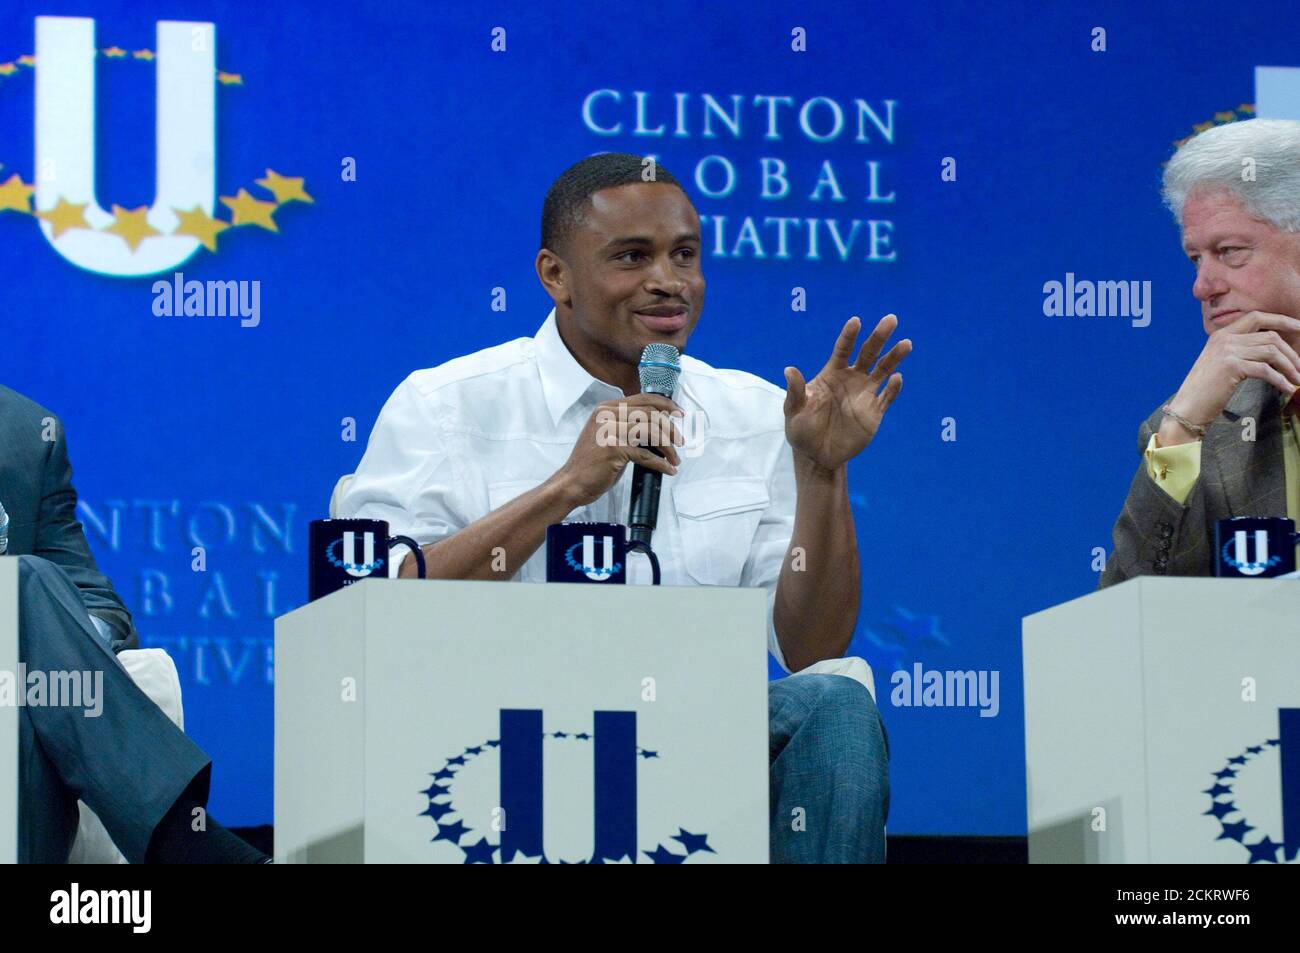 Austin, TX February 14, 2009:Oakland Raiders cornerback Nnamdi Asomugha speaks on a panel at the second annual Clinton Global Initiative University, a conference bringing together students to take action on global challenges such as poverty, hunger, energy, climate change and global health. The program is patterned after Clinton Global Initiative Foundation formed by President Bill Clinton. ©Bob Daemmrich Stock Photo